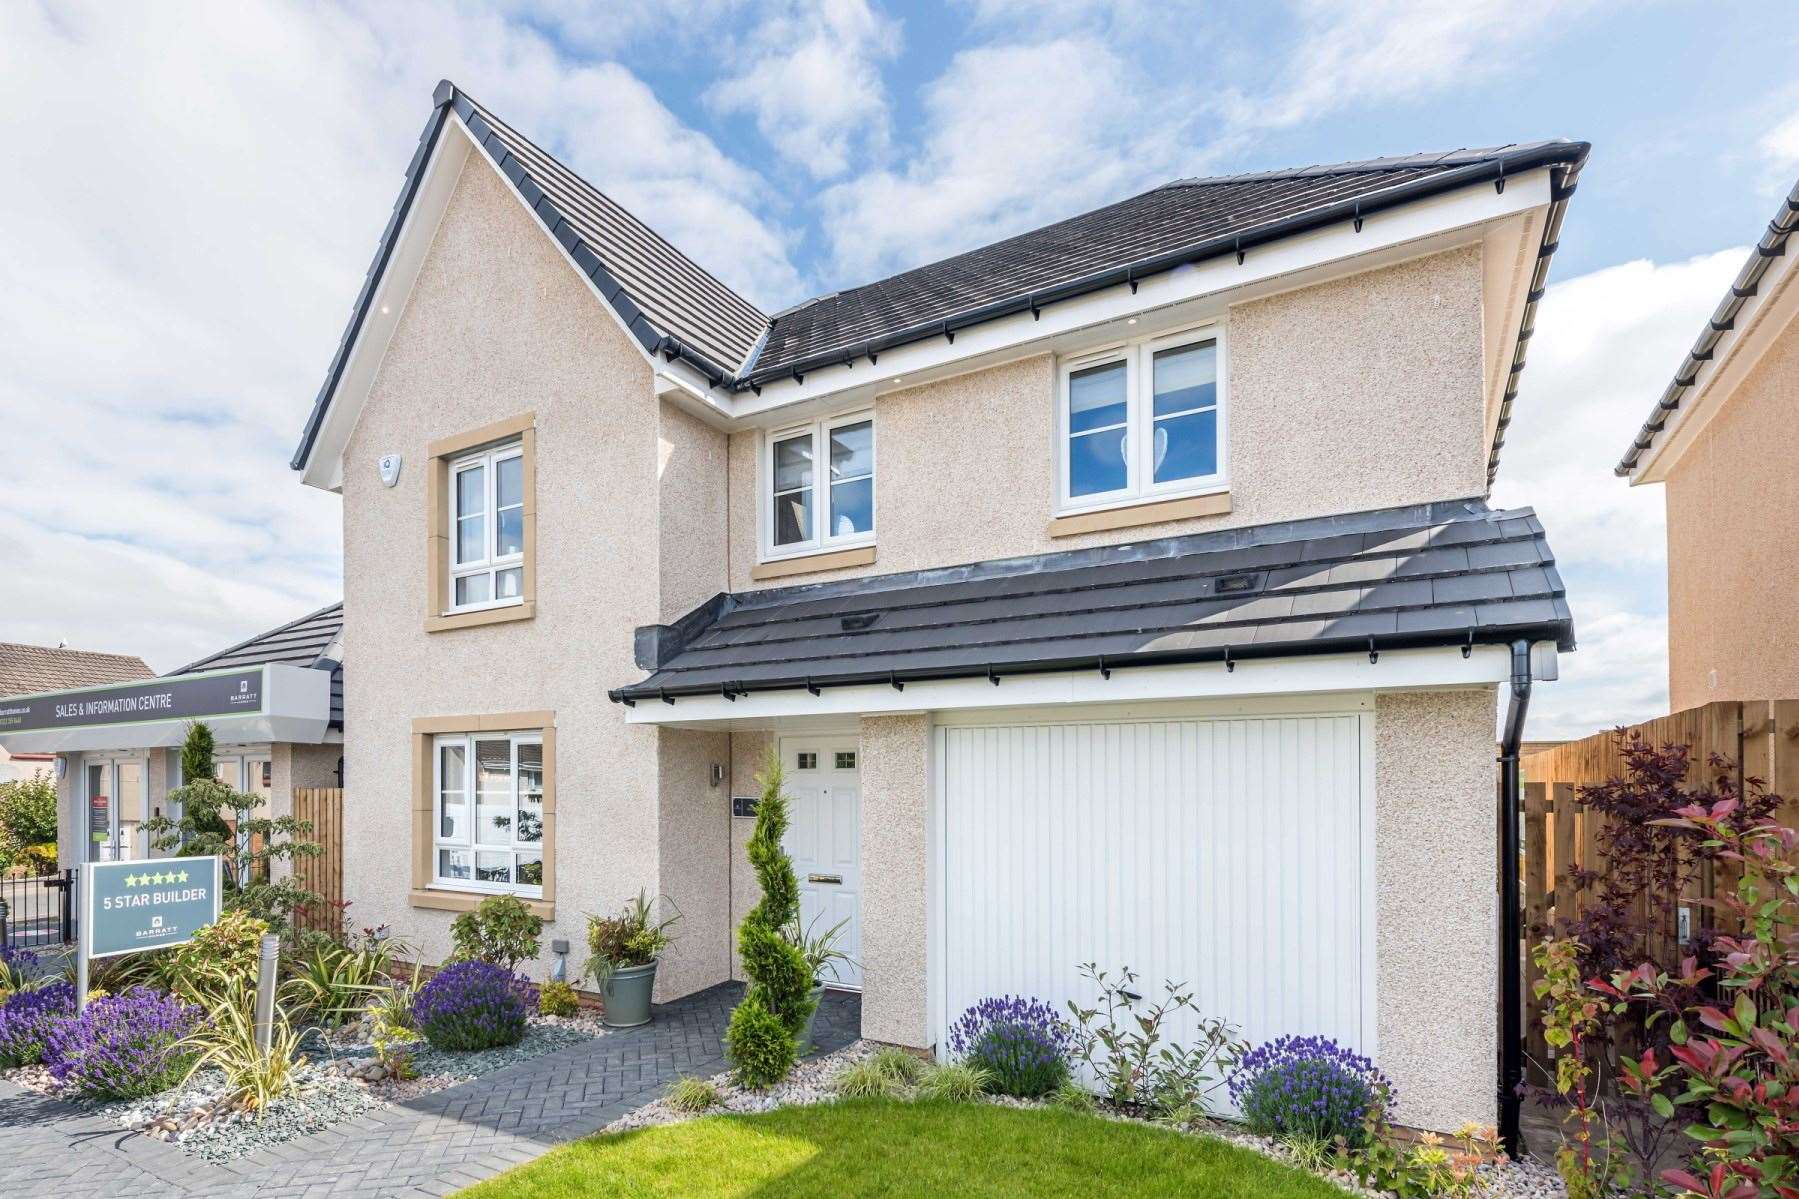 Barratt North Scotland has completed 337 new homes and supported 980 direct, indirect and induced jobs across the north, north-east and Perthshire.